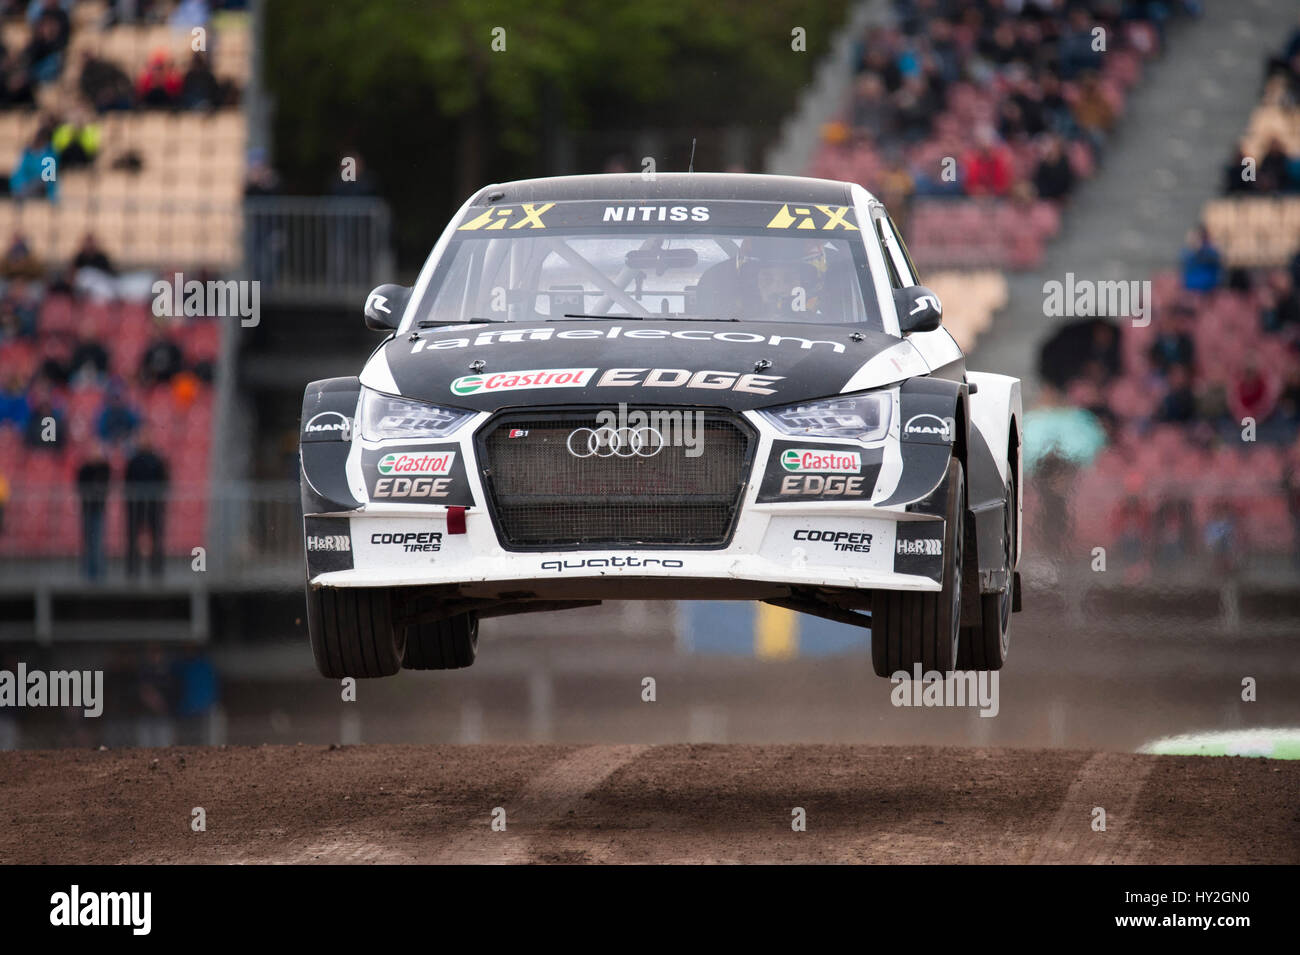 Barcelona, Spain. 1 April, 2017. The Audi S1 car driven by Reinis Nitiss, in action during the Round 1 - Rallycross of Barcelona at the Circuit of Catalunya. Credit: Pablo Guillen/Alamy Live News Stock Photo